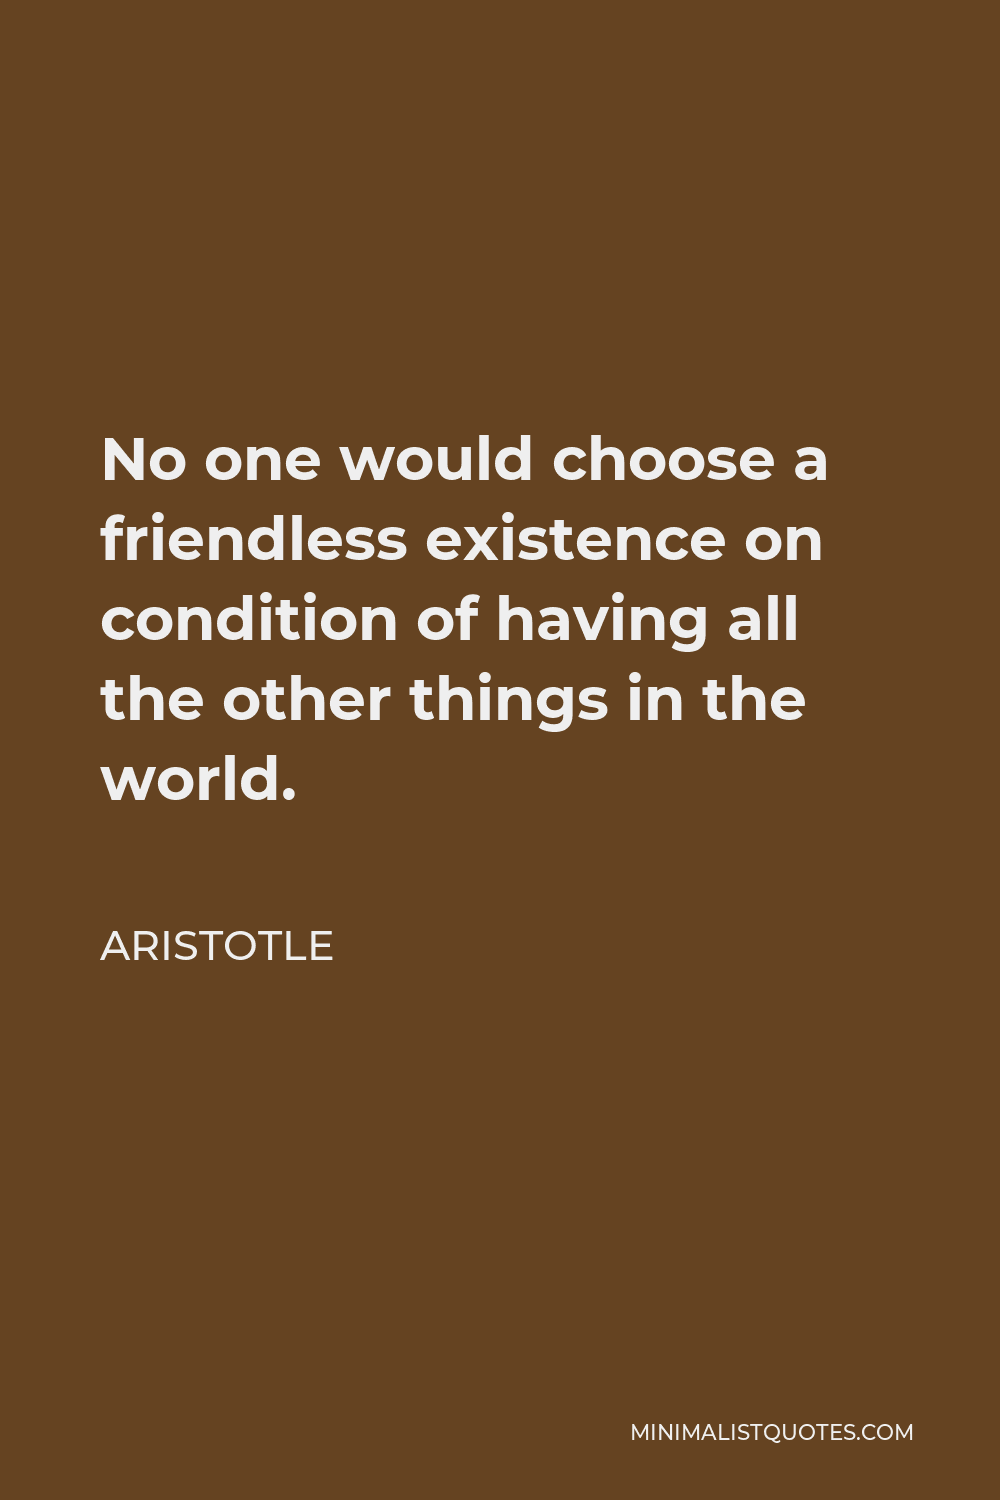 Aristotle Quote - No one would choose a friendless existence on condition of having all the other things in the world.